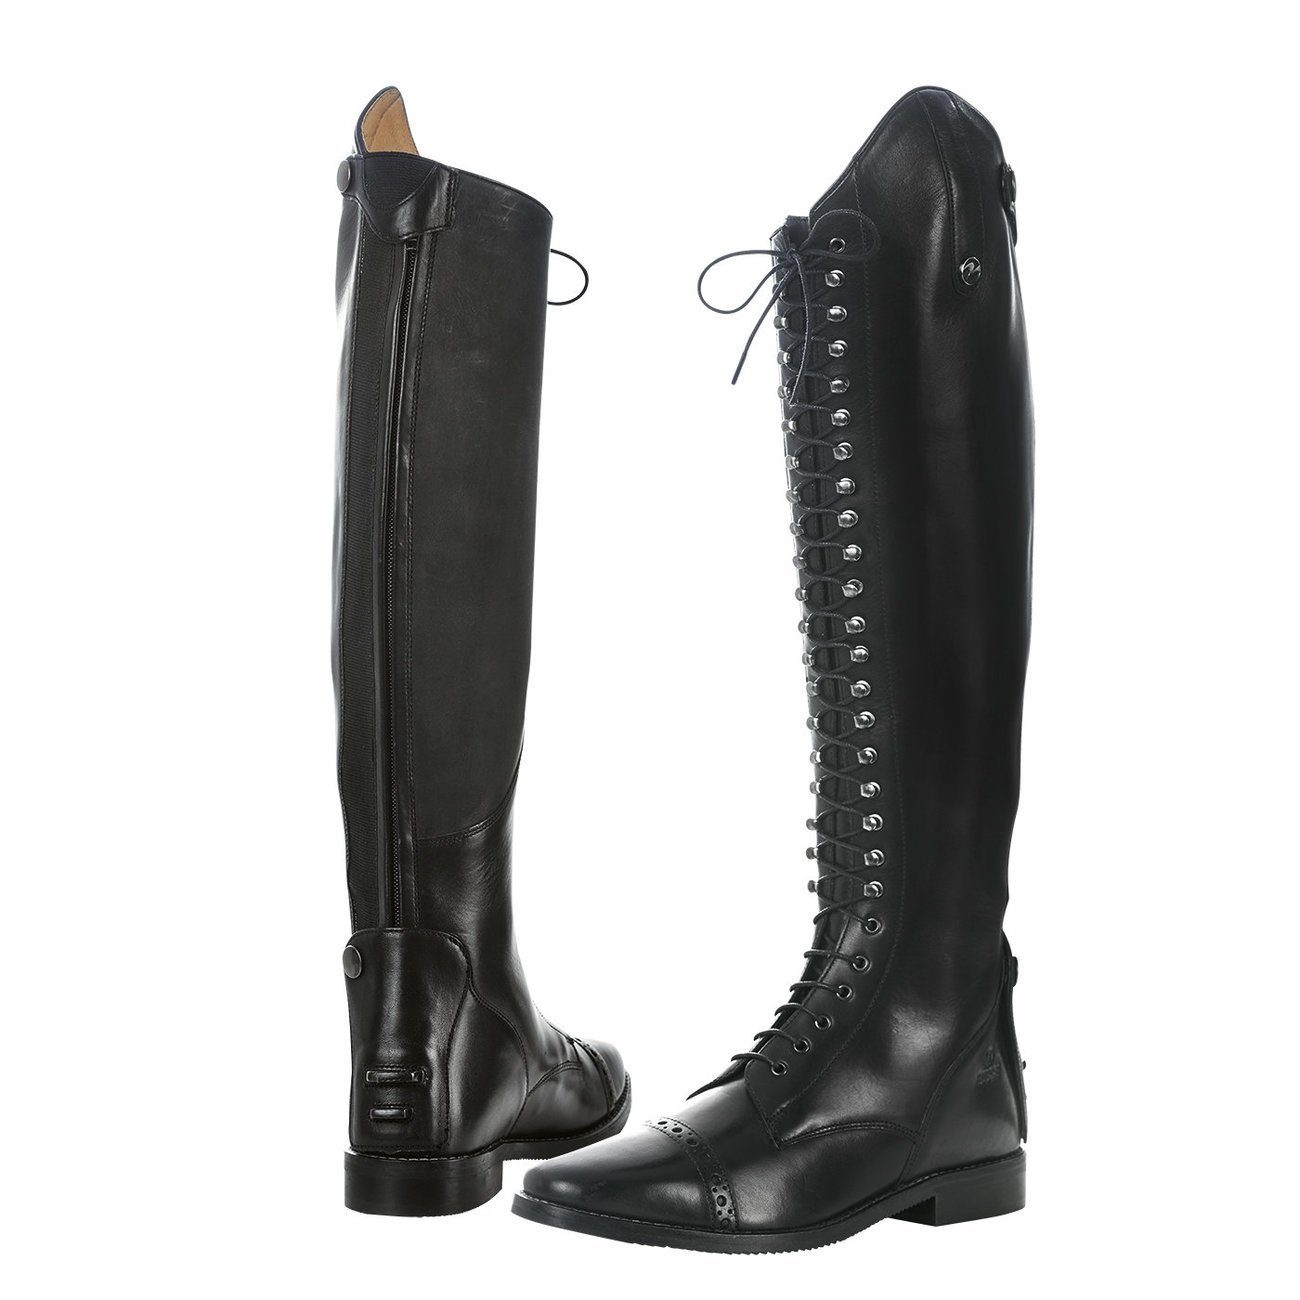 BUSSE Laval Reitstiefel